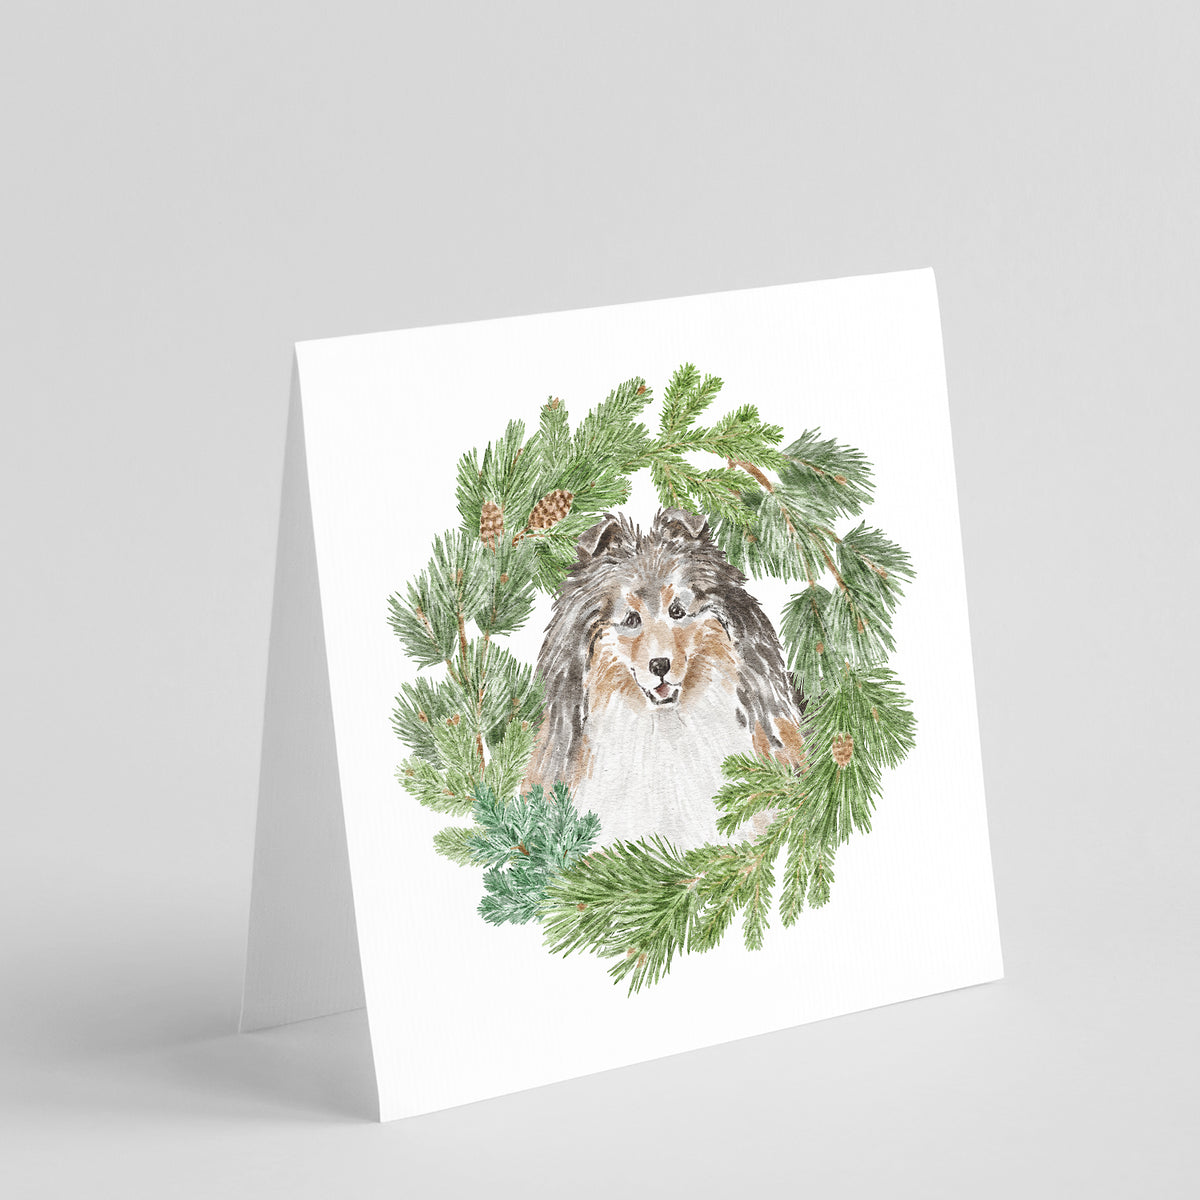 Buy this Sheltie/Shetland Sheepdog Tricolor Smiling #1 with Christmas Wreath Square Greeting Cards and Envelopes Pack of 8